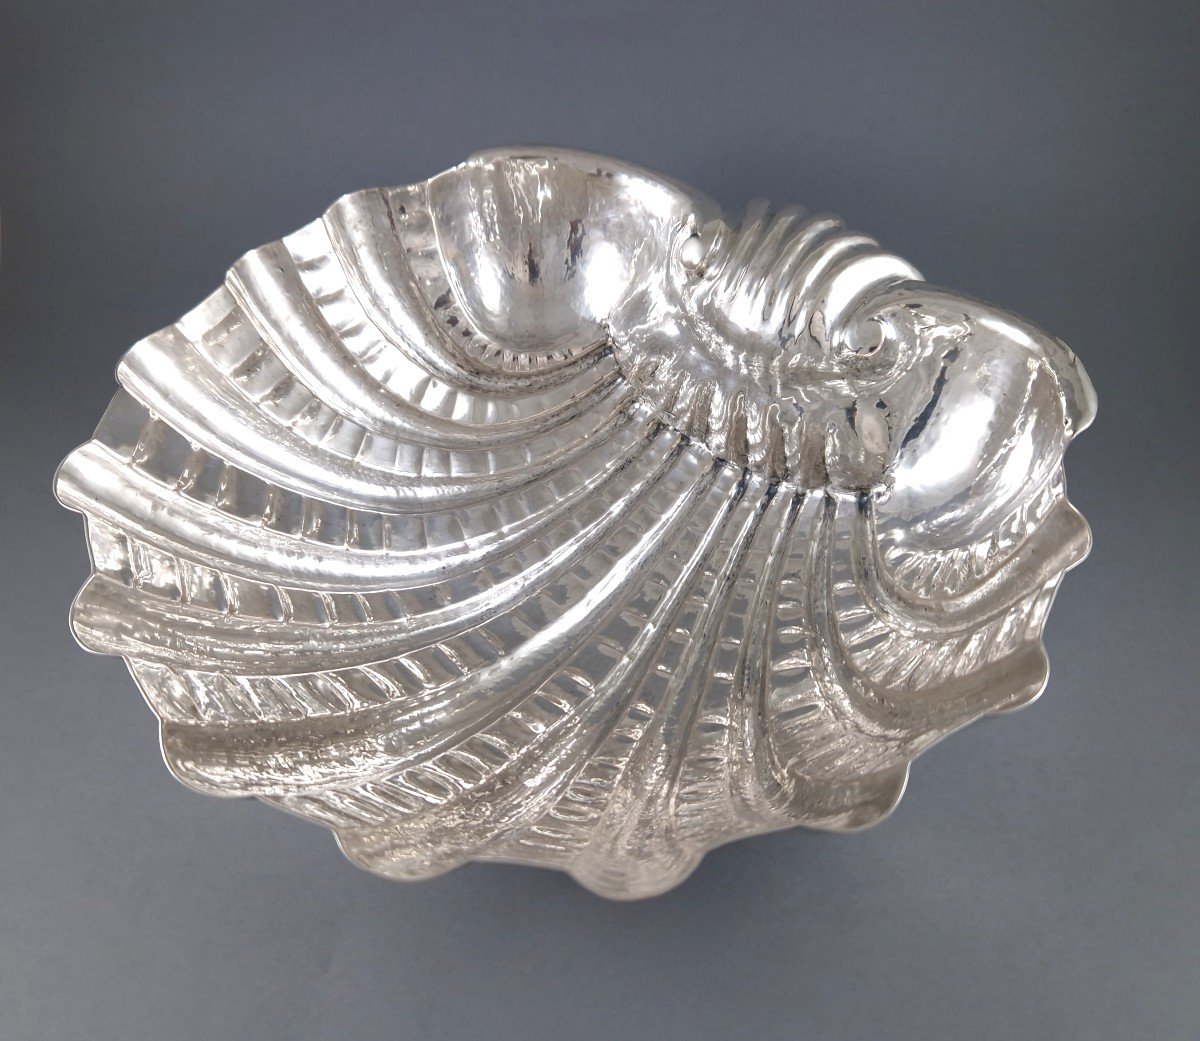 Coupe coquille en argent massif